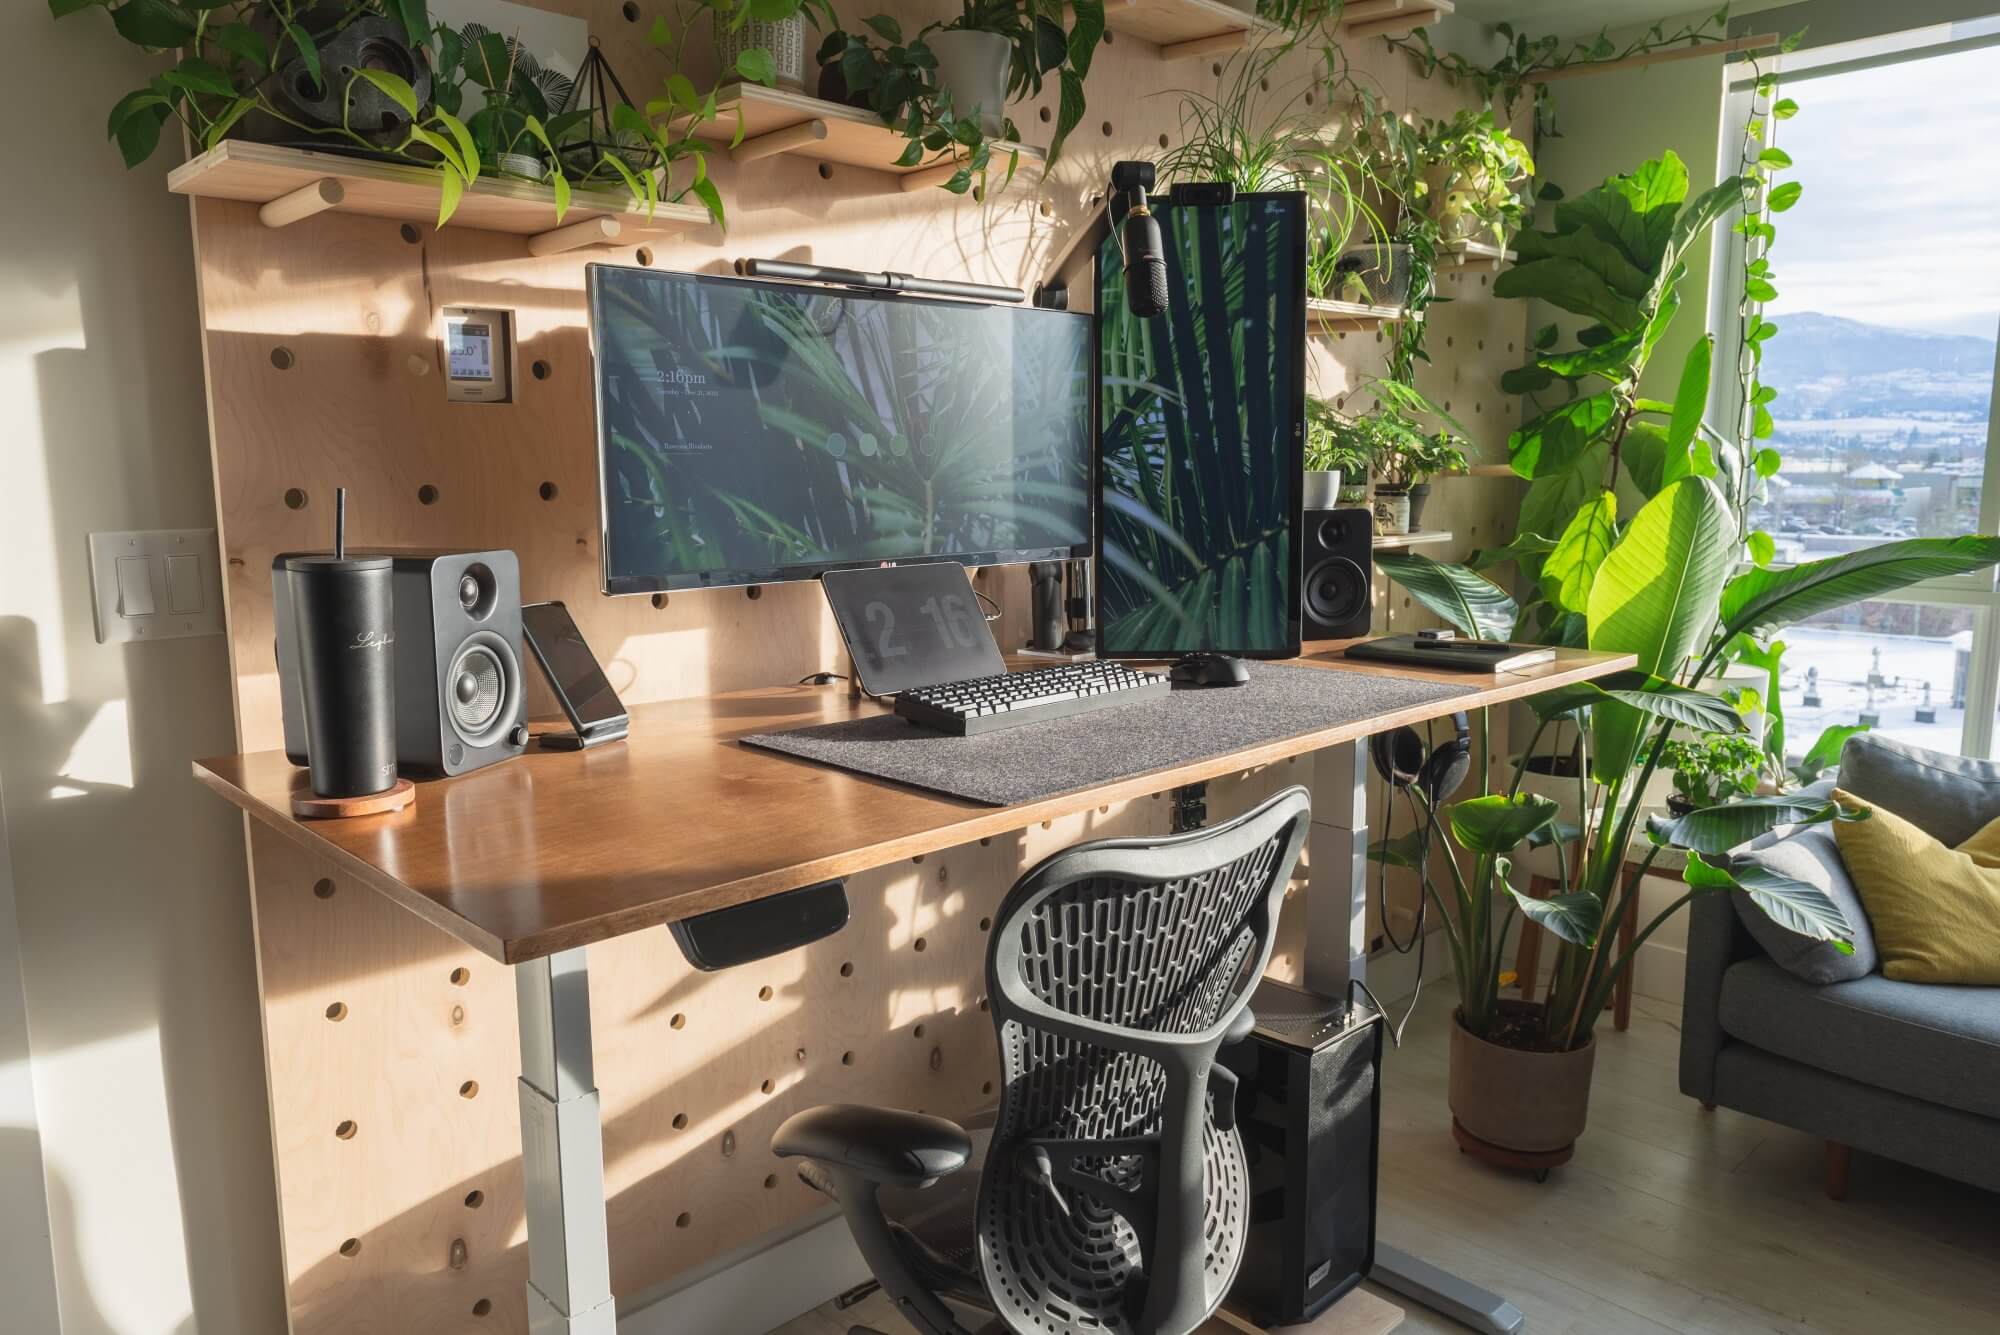 How to LEVEL UP Your Desk Setup in 2023 - Minimalist Desk